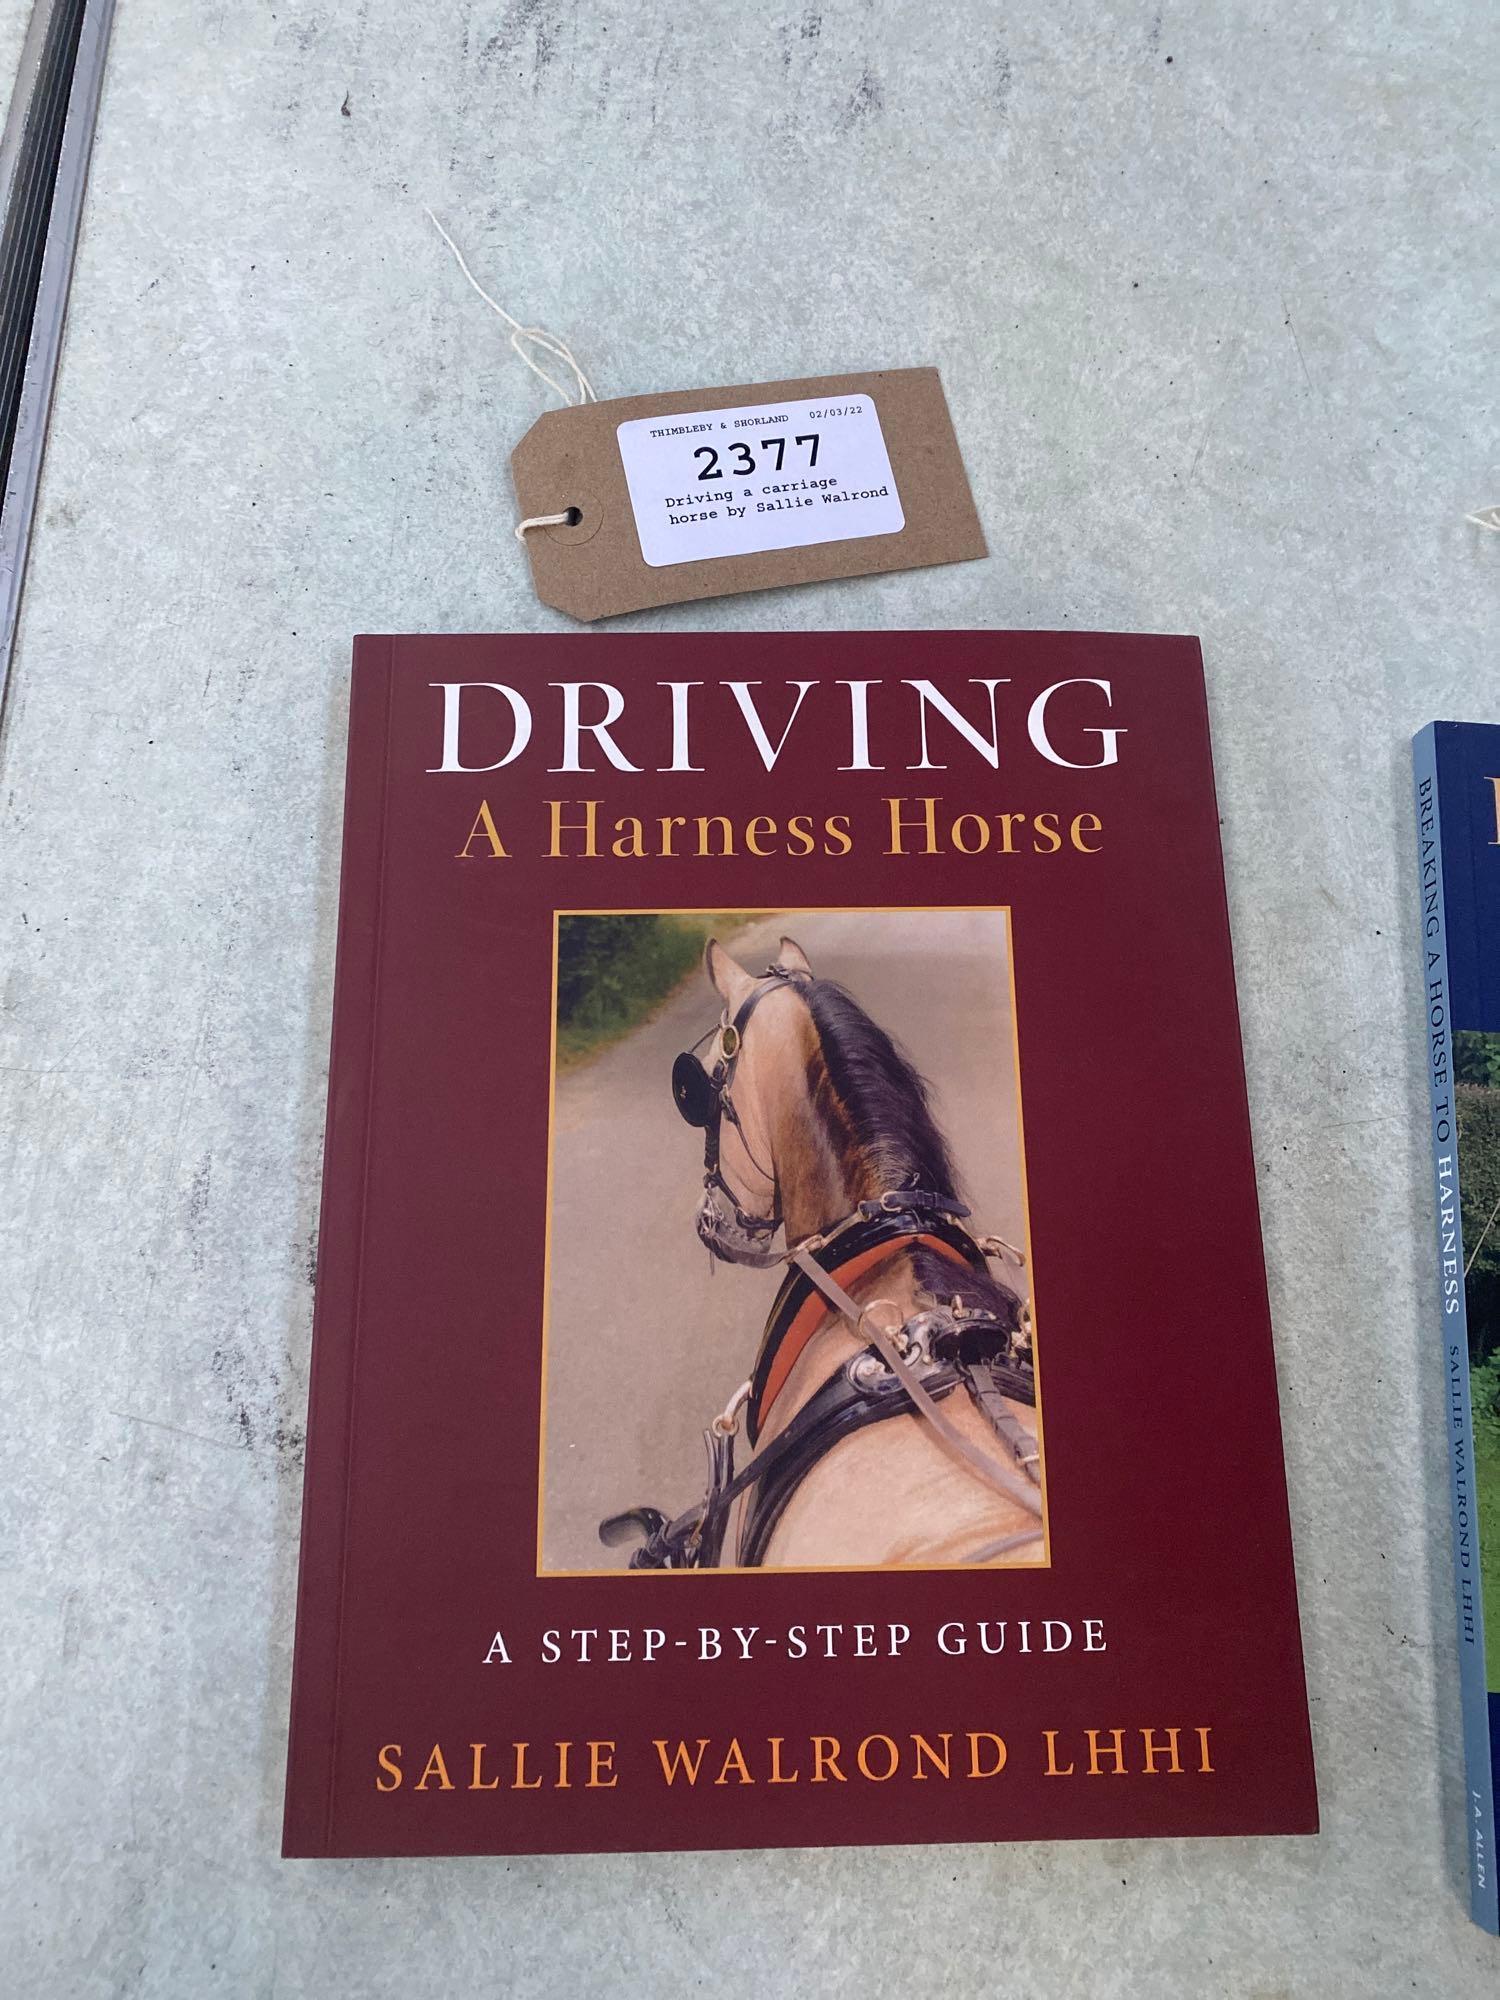 Driving a carriage horse by Sallie Walrond